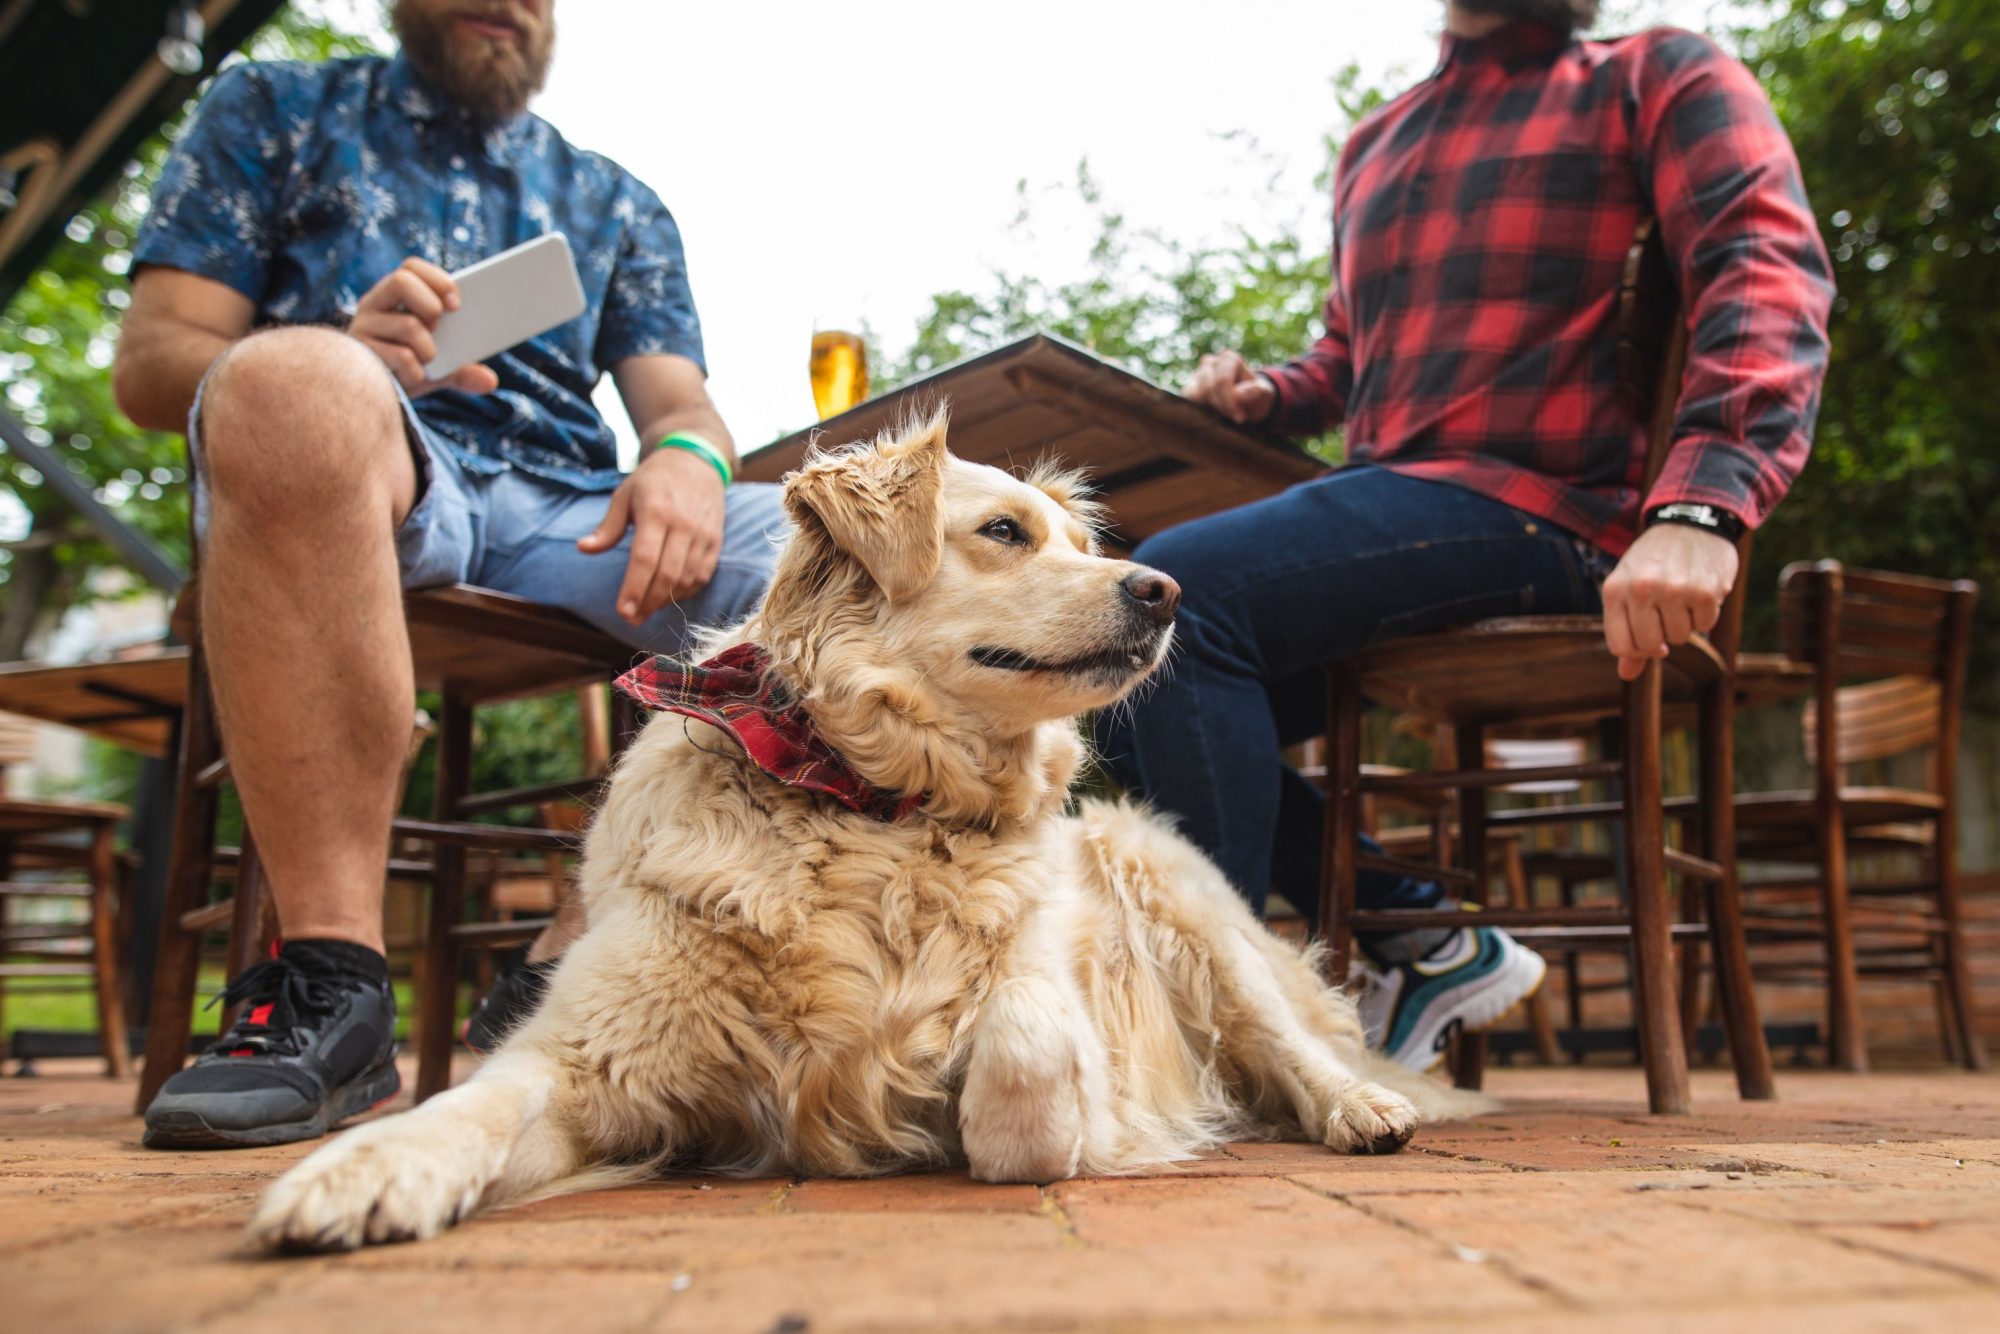 Dog with red bandana on a patio.